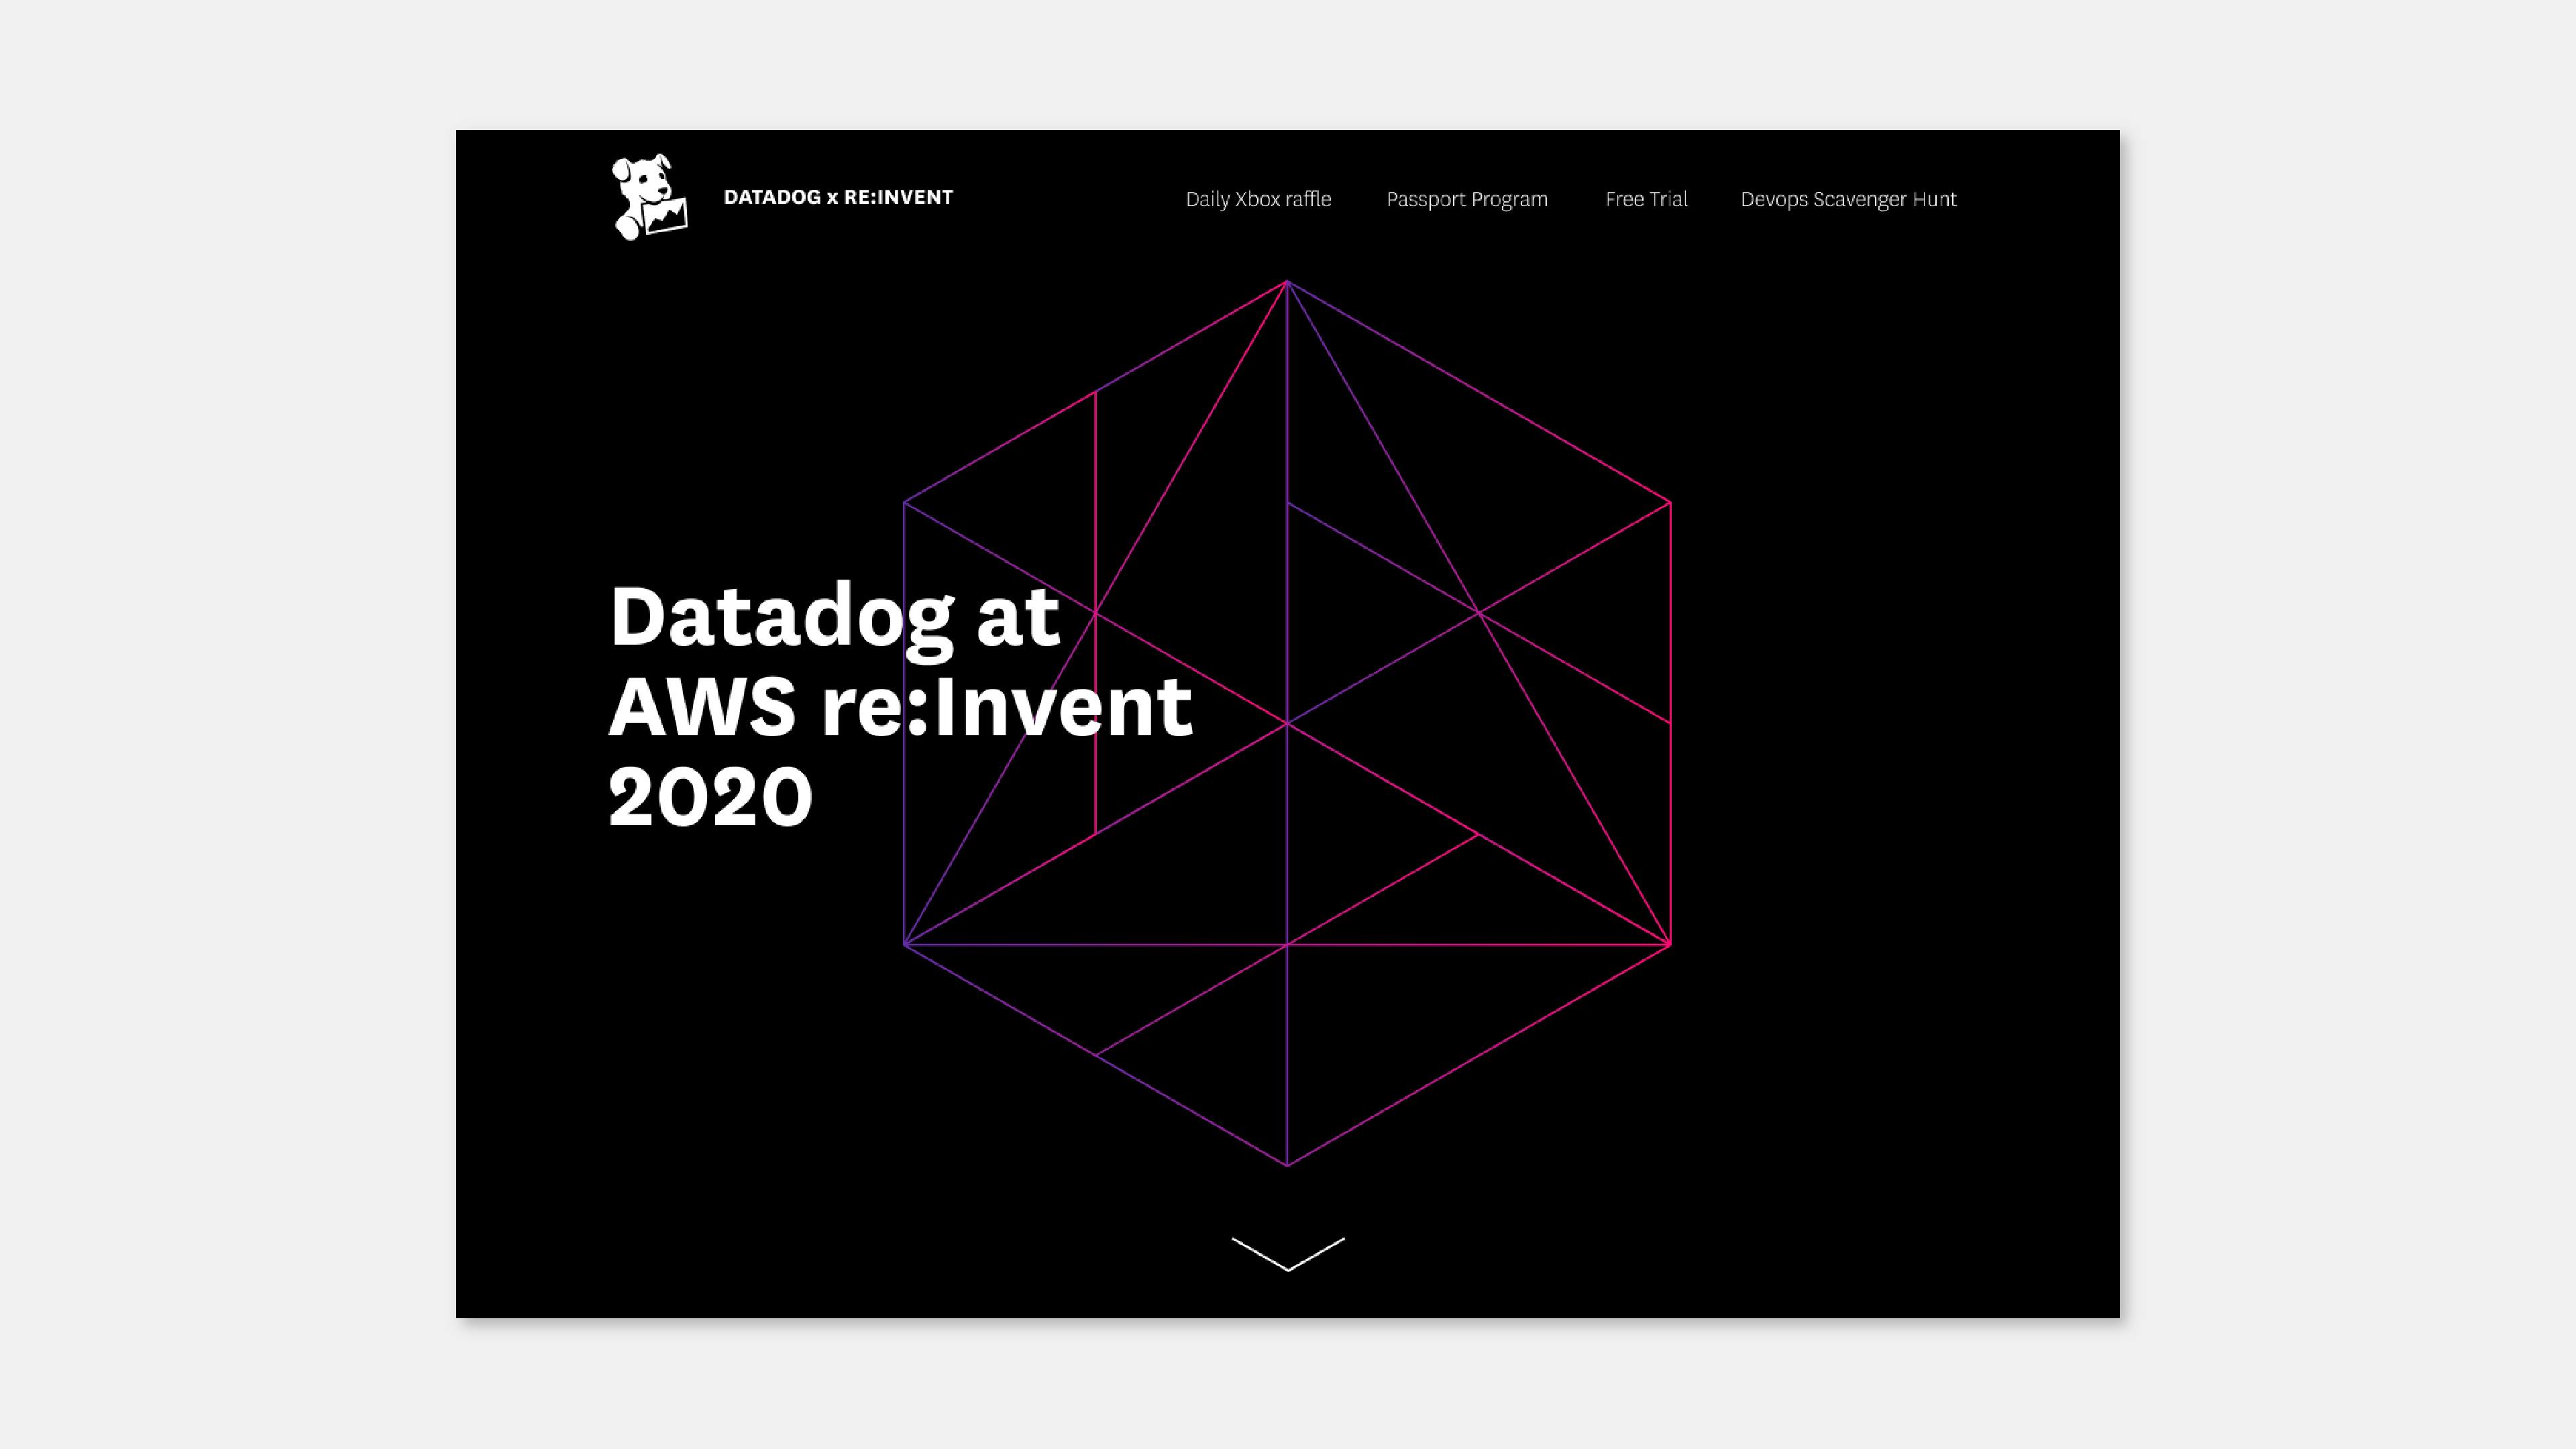 A screencapture of the Datadog at AWS re:Invent 2020 landing page. The focal point of the webpage is a hexagon comprised of the layered abstracted shapes in the above flow chart. The website's background color is black and the centered hexagonal shape's lines are pink and purple gradients.